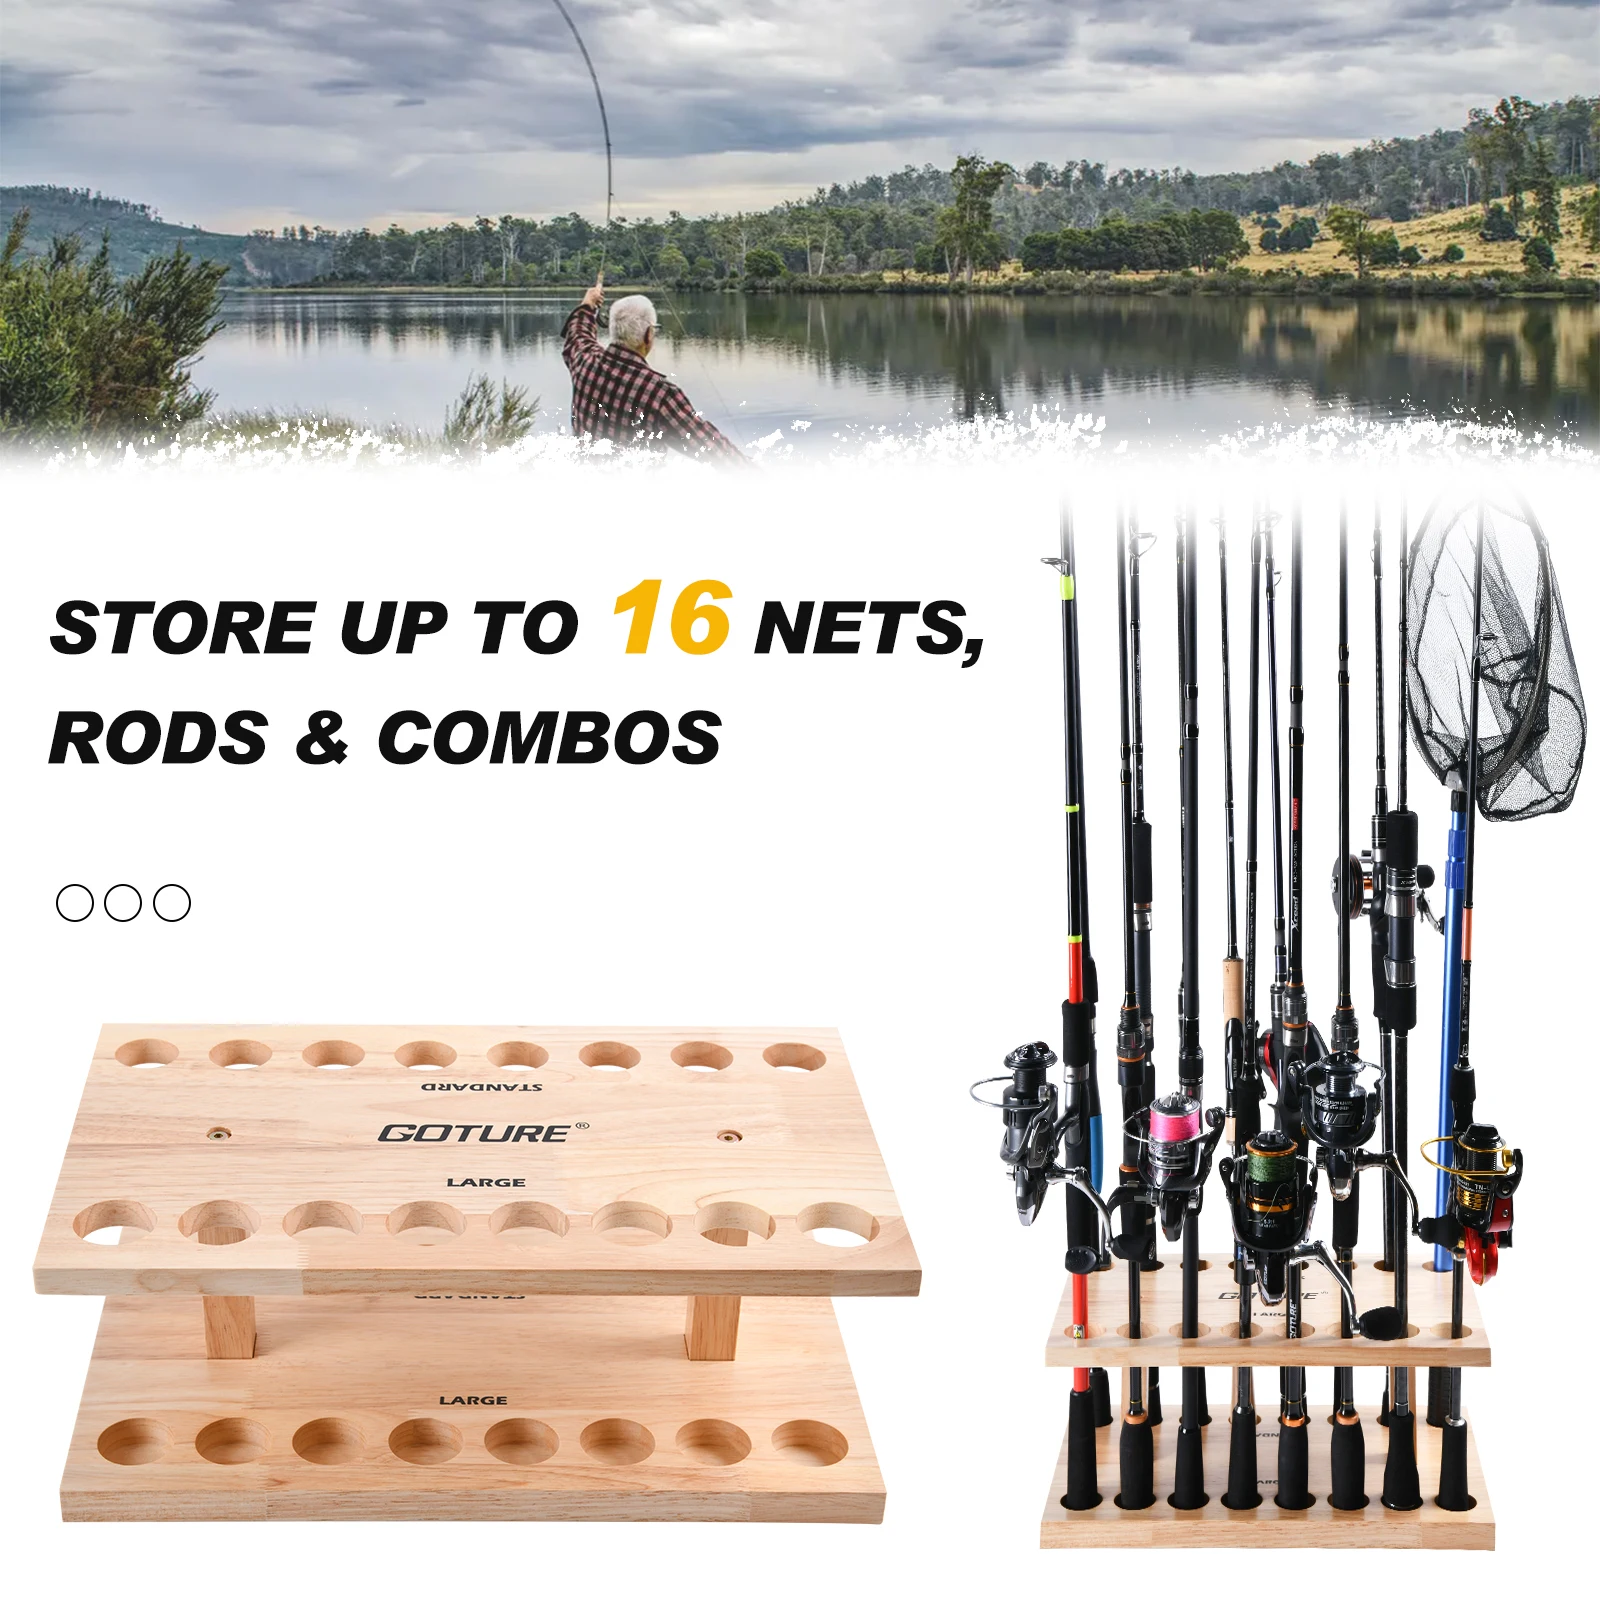 Goture 16 Hole Rack Square Fishing Rod Holder Pole Holders Vertical Rod  Holder Solid Wood Display Mount Fishing Rod Storage Tool - AliExpress